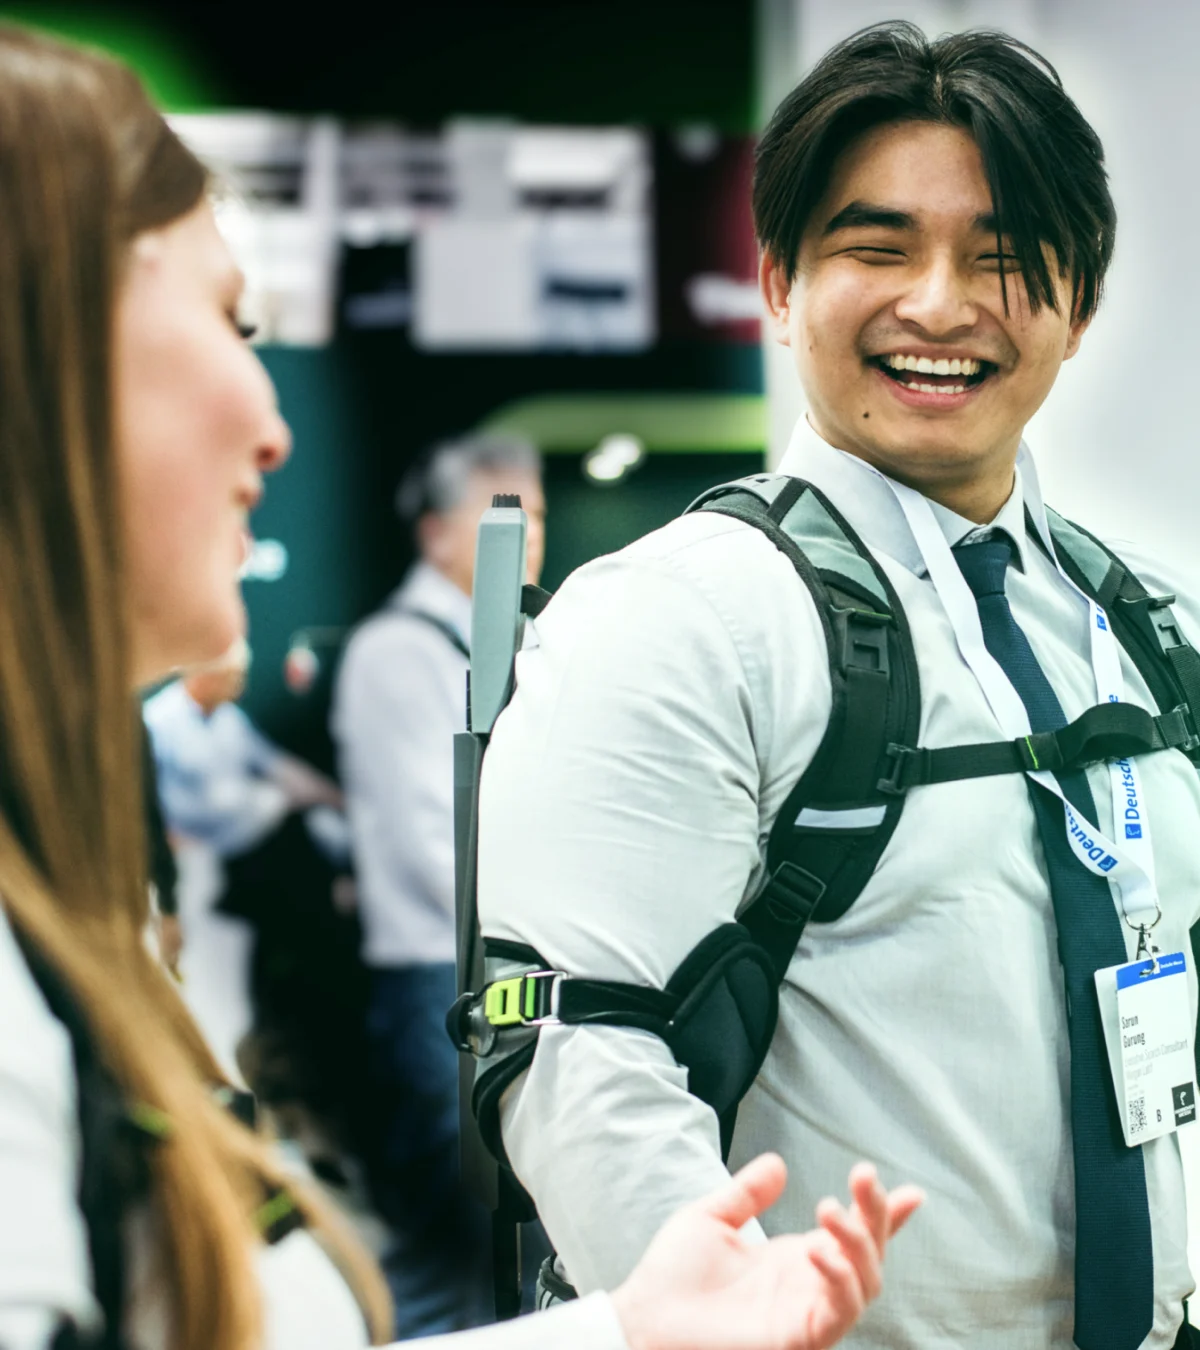 Male person wearing a SUITX exoskeleton at a trade show and smiling while talking to a woman in the foreground